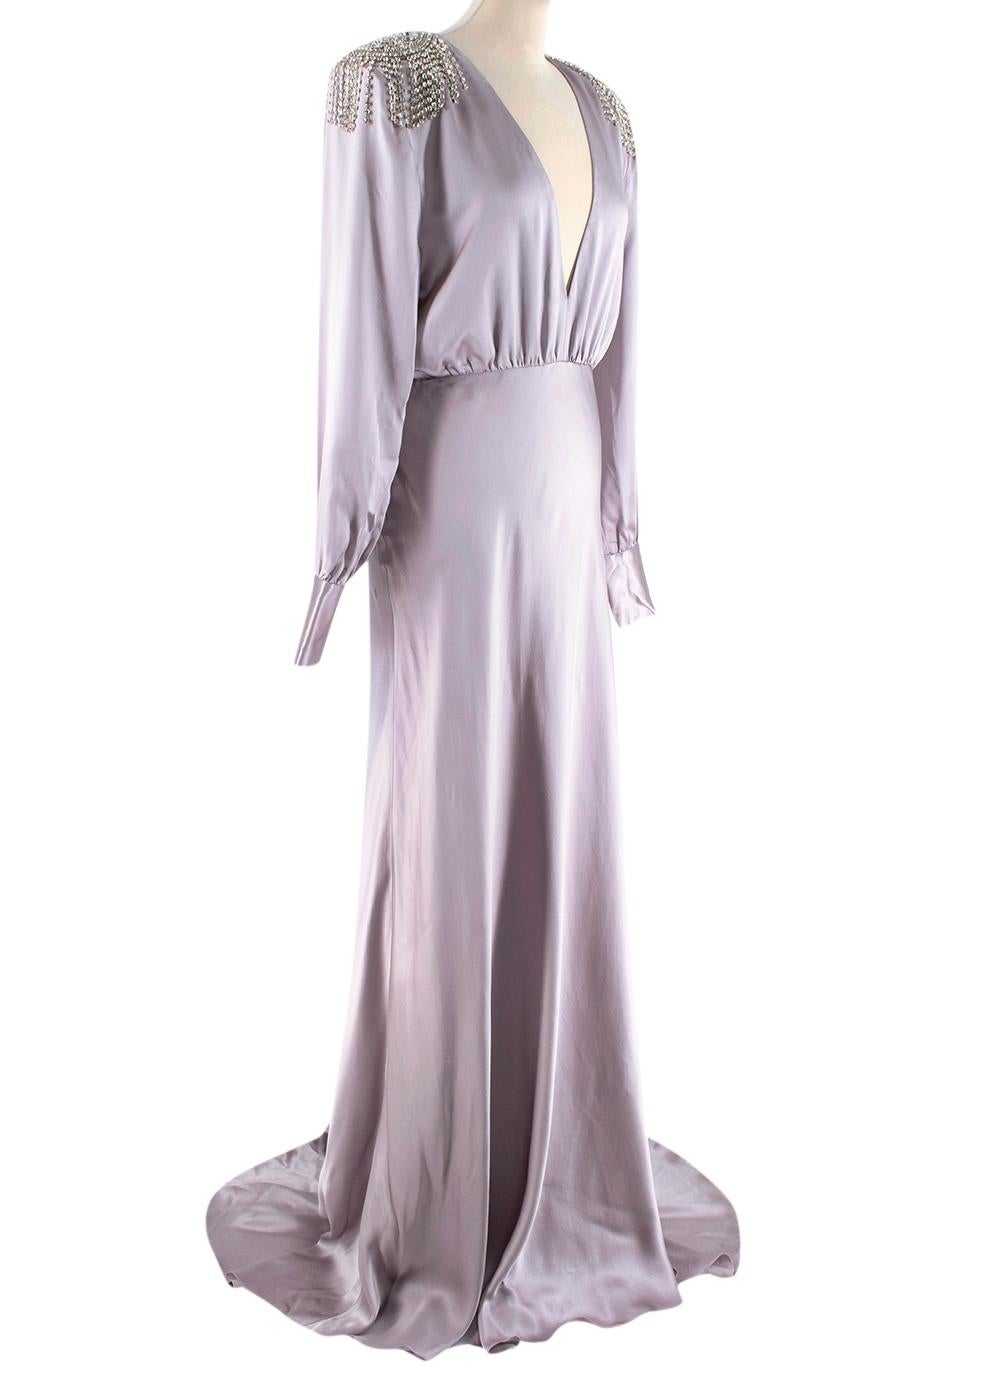 Alessandra Rich Crystal Embellished Lavender Silk Gown
 

 -Alessandra Rich fluid silk dress with V neckline and padded shoulders.
 - It features embroidered crystals, concealed back zip closure, covered buttons on the cuffs and longer back.
